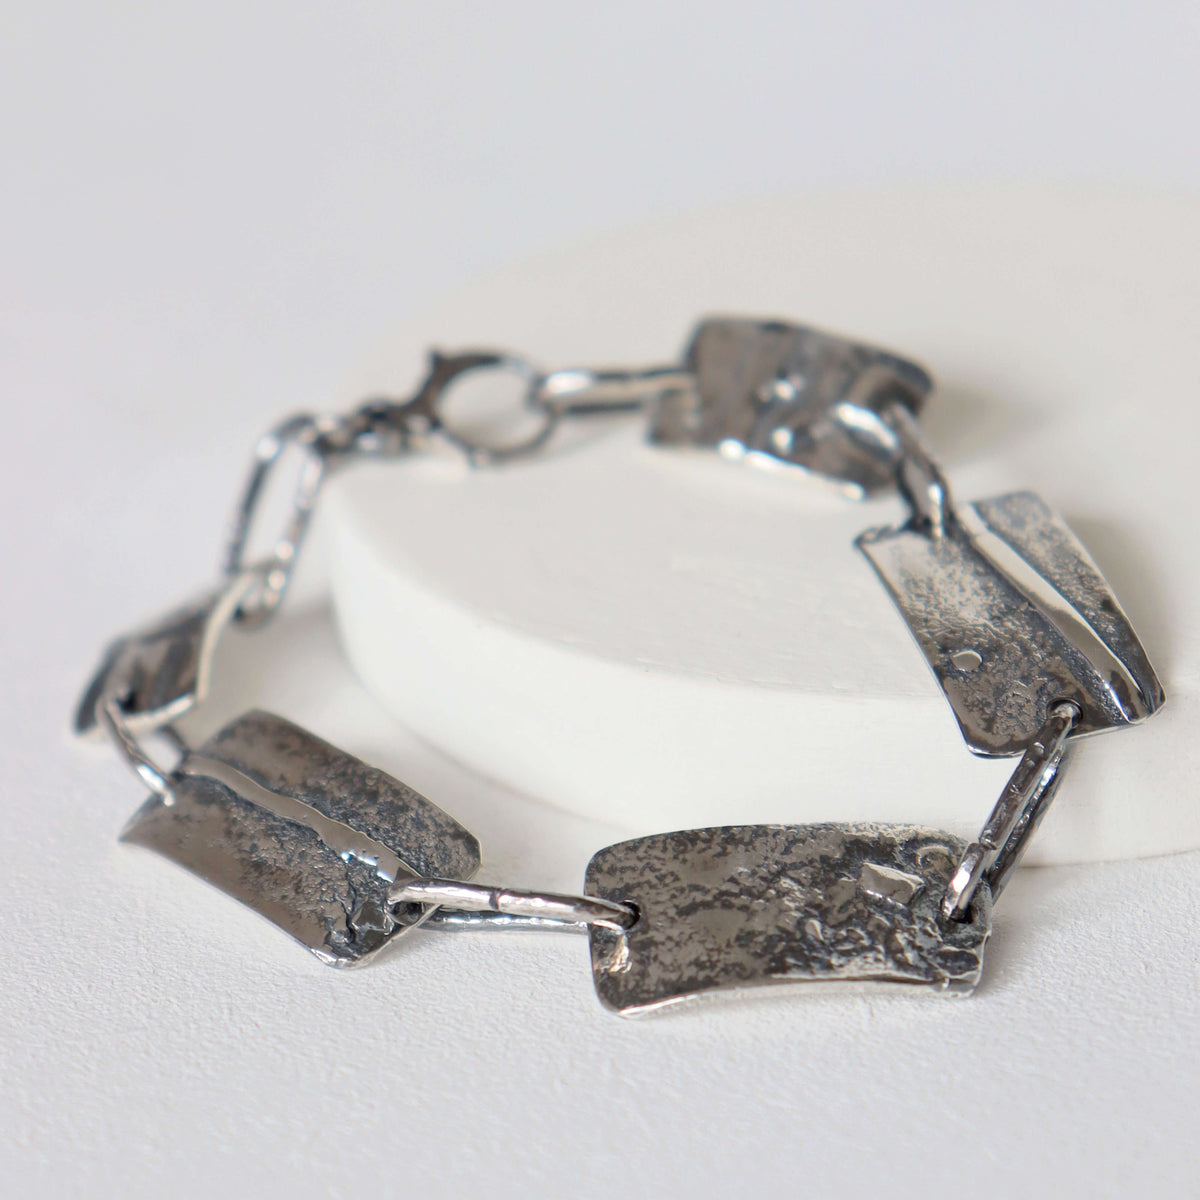 Oxidized silver bracelet, rustic bracelet with texture, round lobster clasp, handcrafted by roff